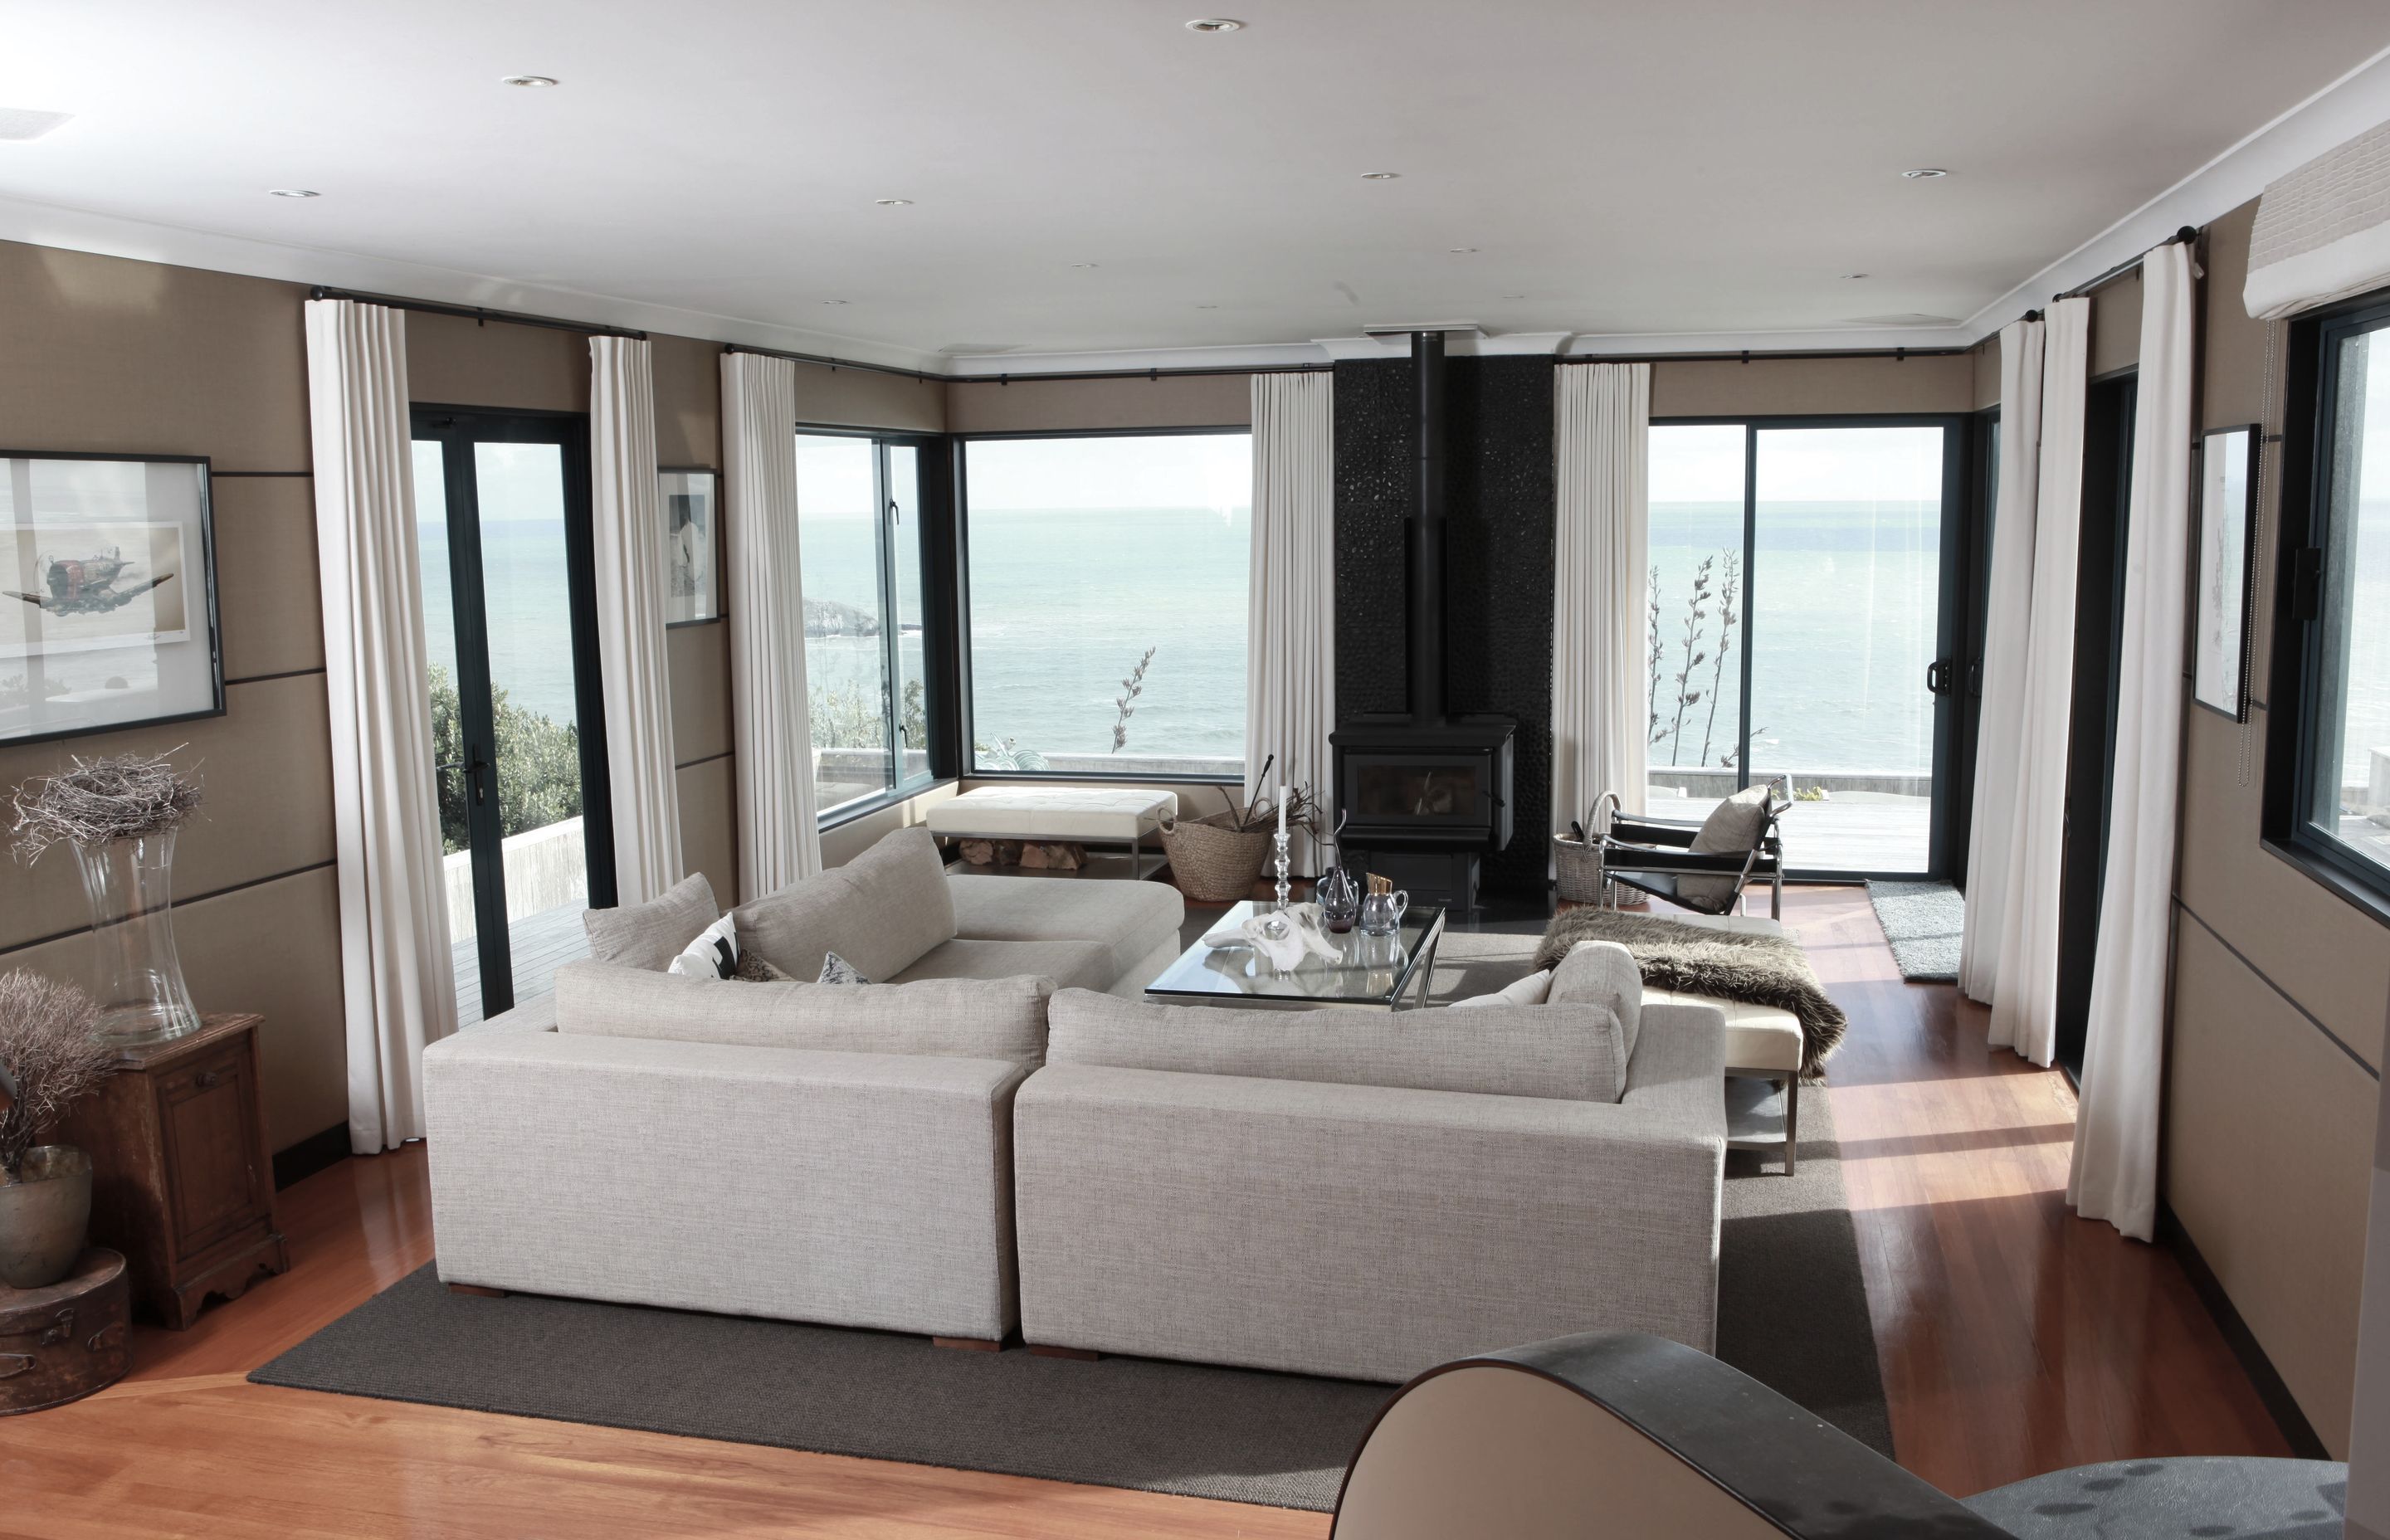 Muriwai Beach Residential Fit out